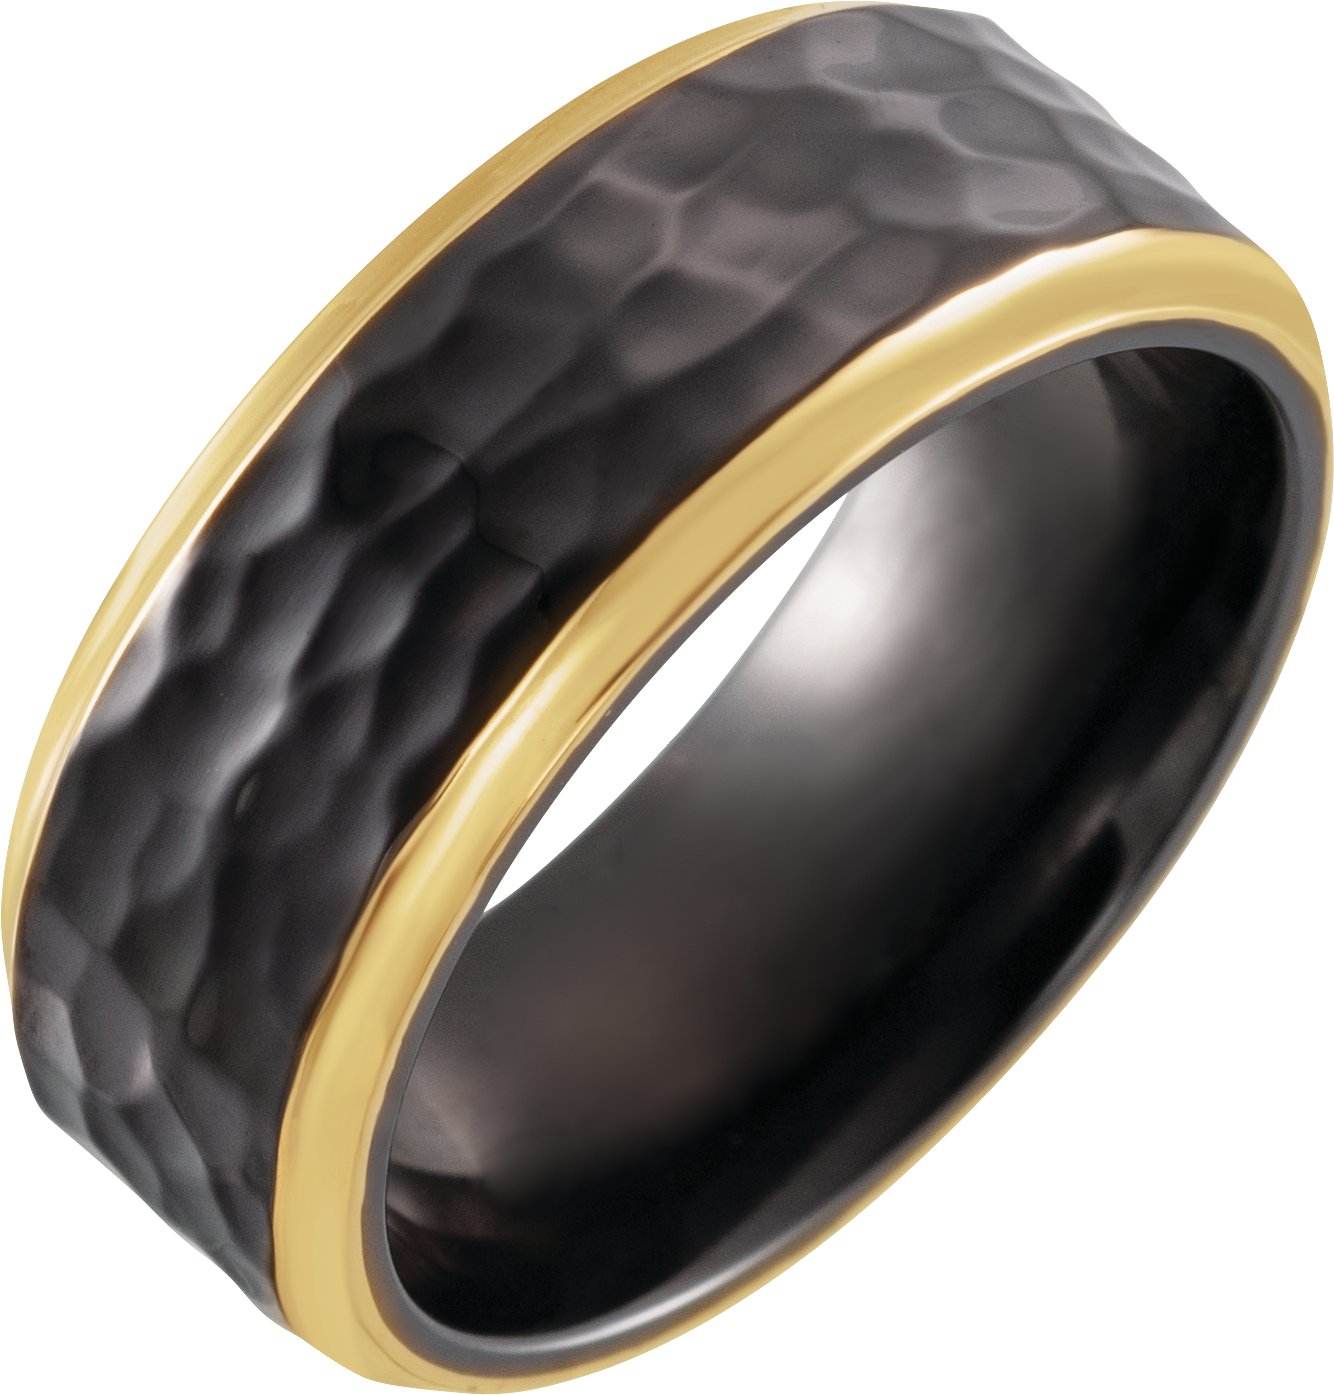 18K Yellow Gold PVD Black Titanium 8 mm Flat Size 12 Band with Hammer Finish